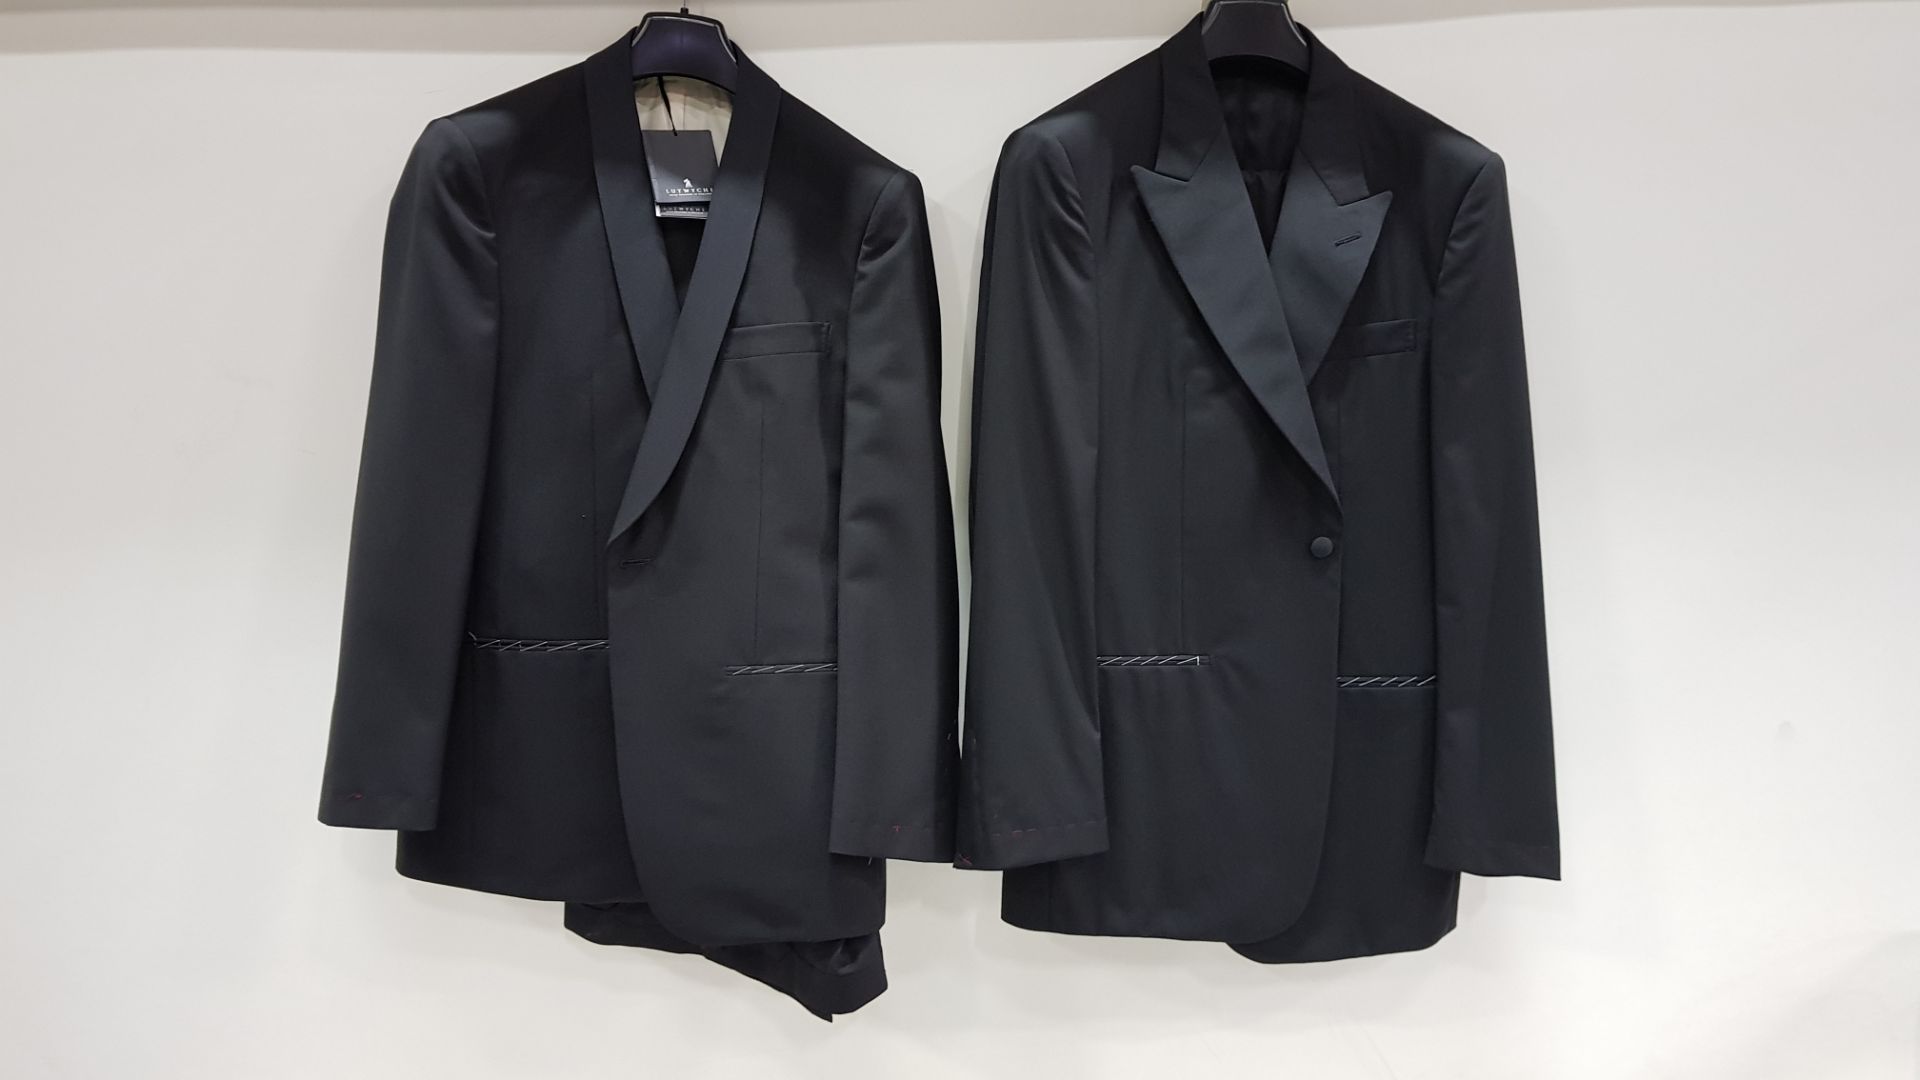 3 X BRAND NEW LUTWYCHE BLACK TAILORED SUITS SIZES 44L,42R,52R (PLEASE NOTE SUITS NOT FULLY